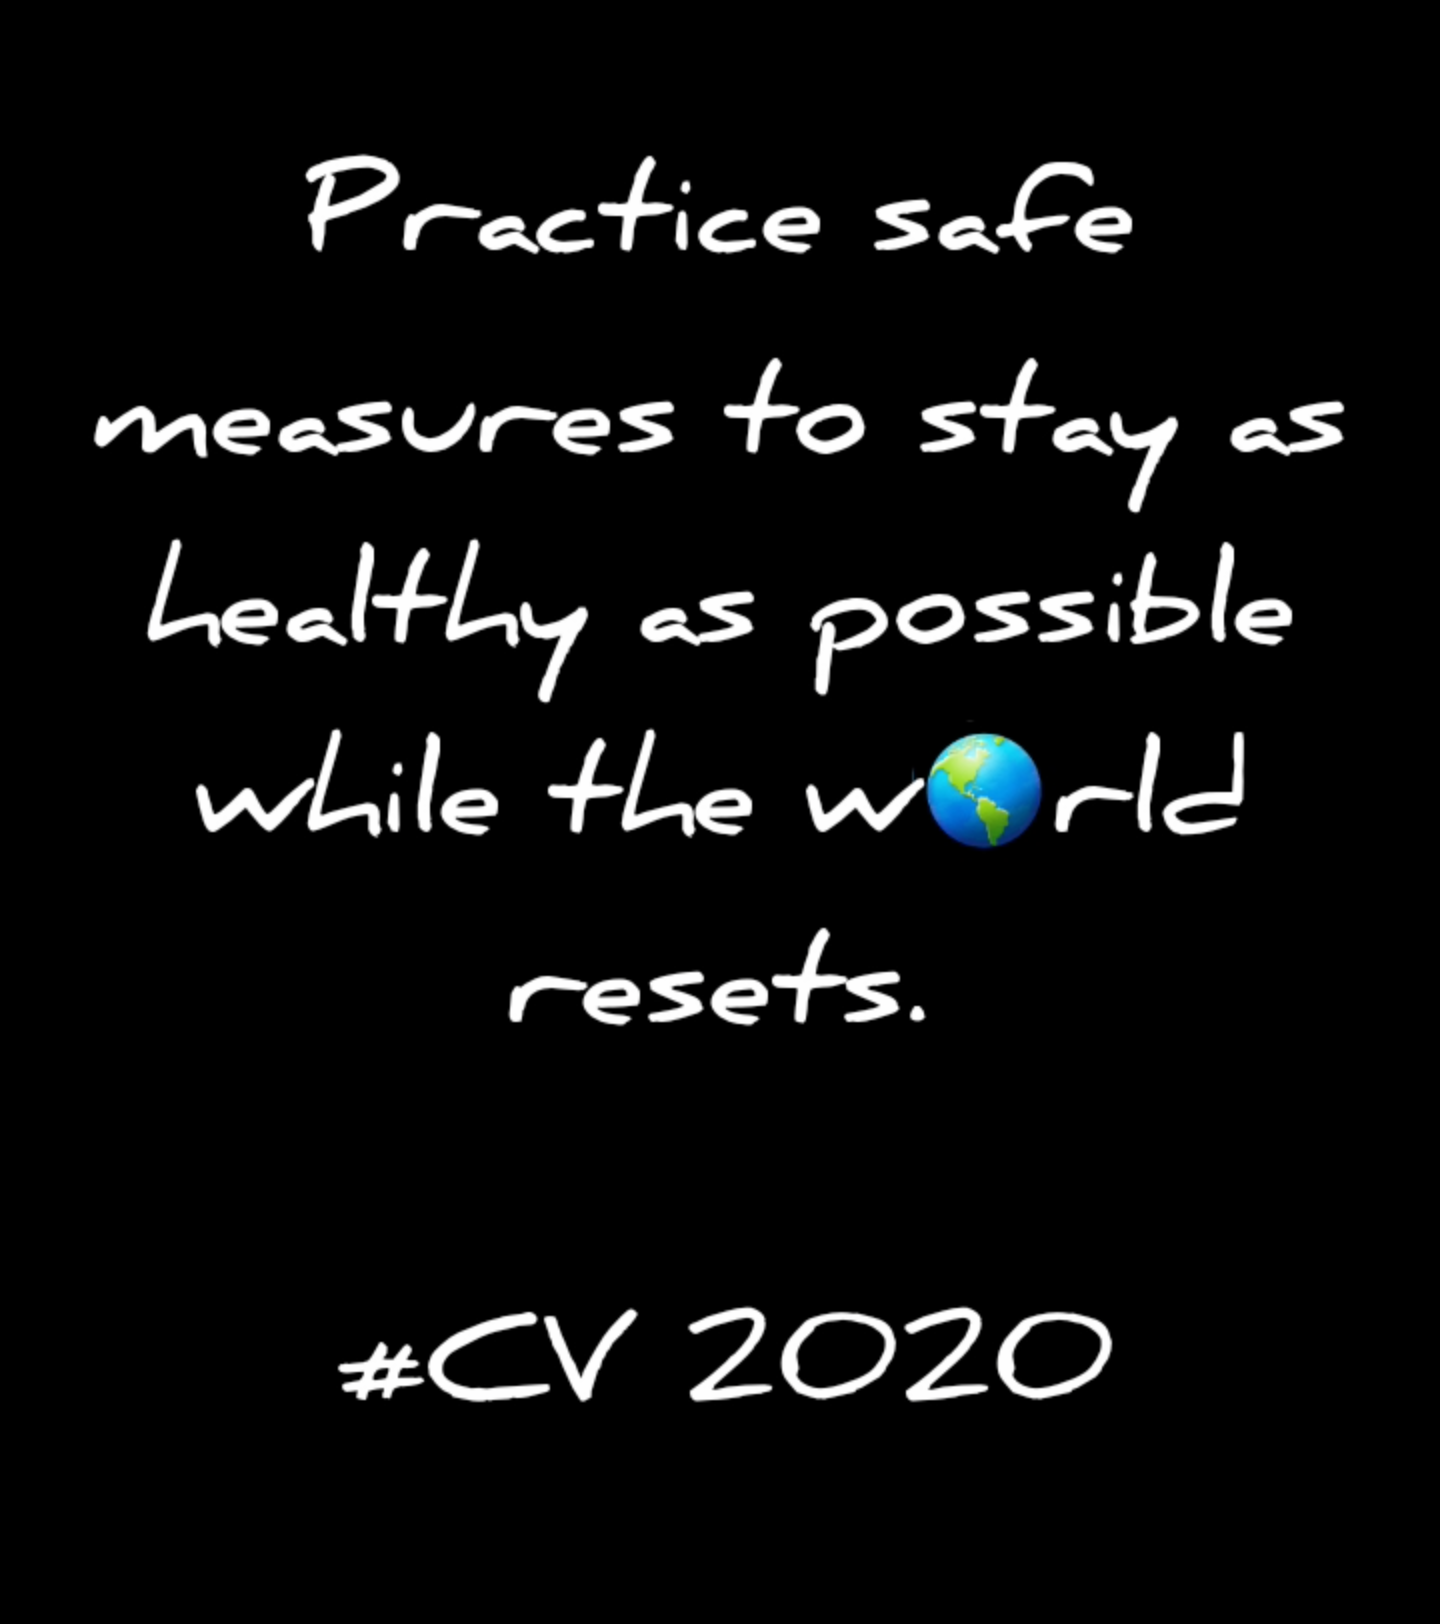 Practice_Safety_CV_2020.png